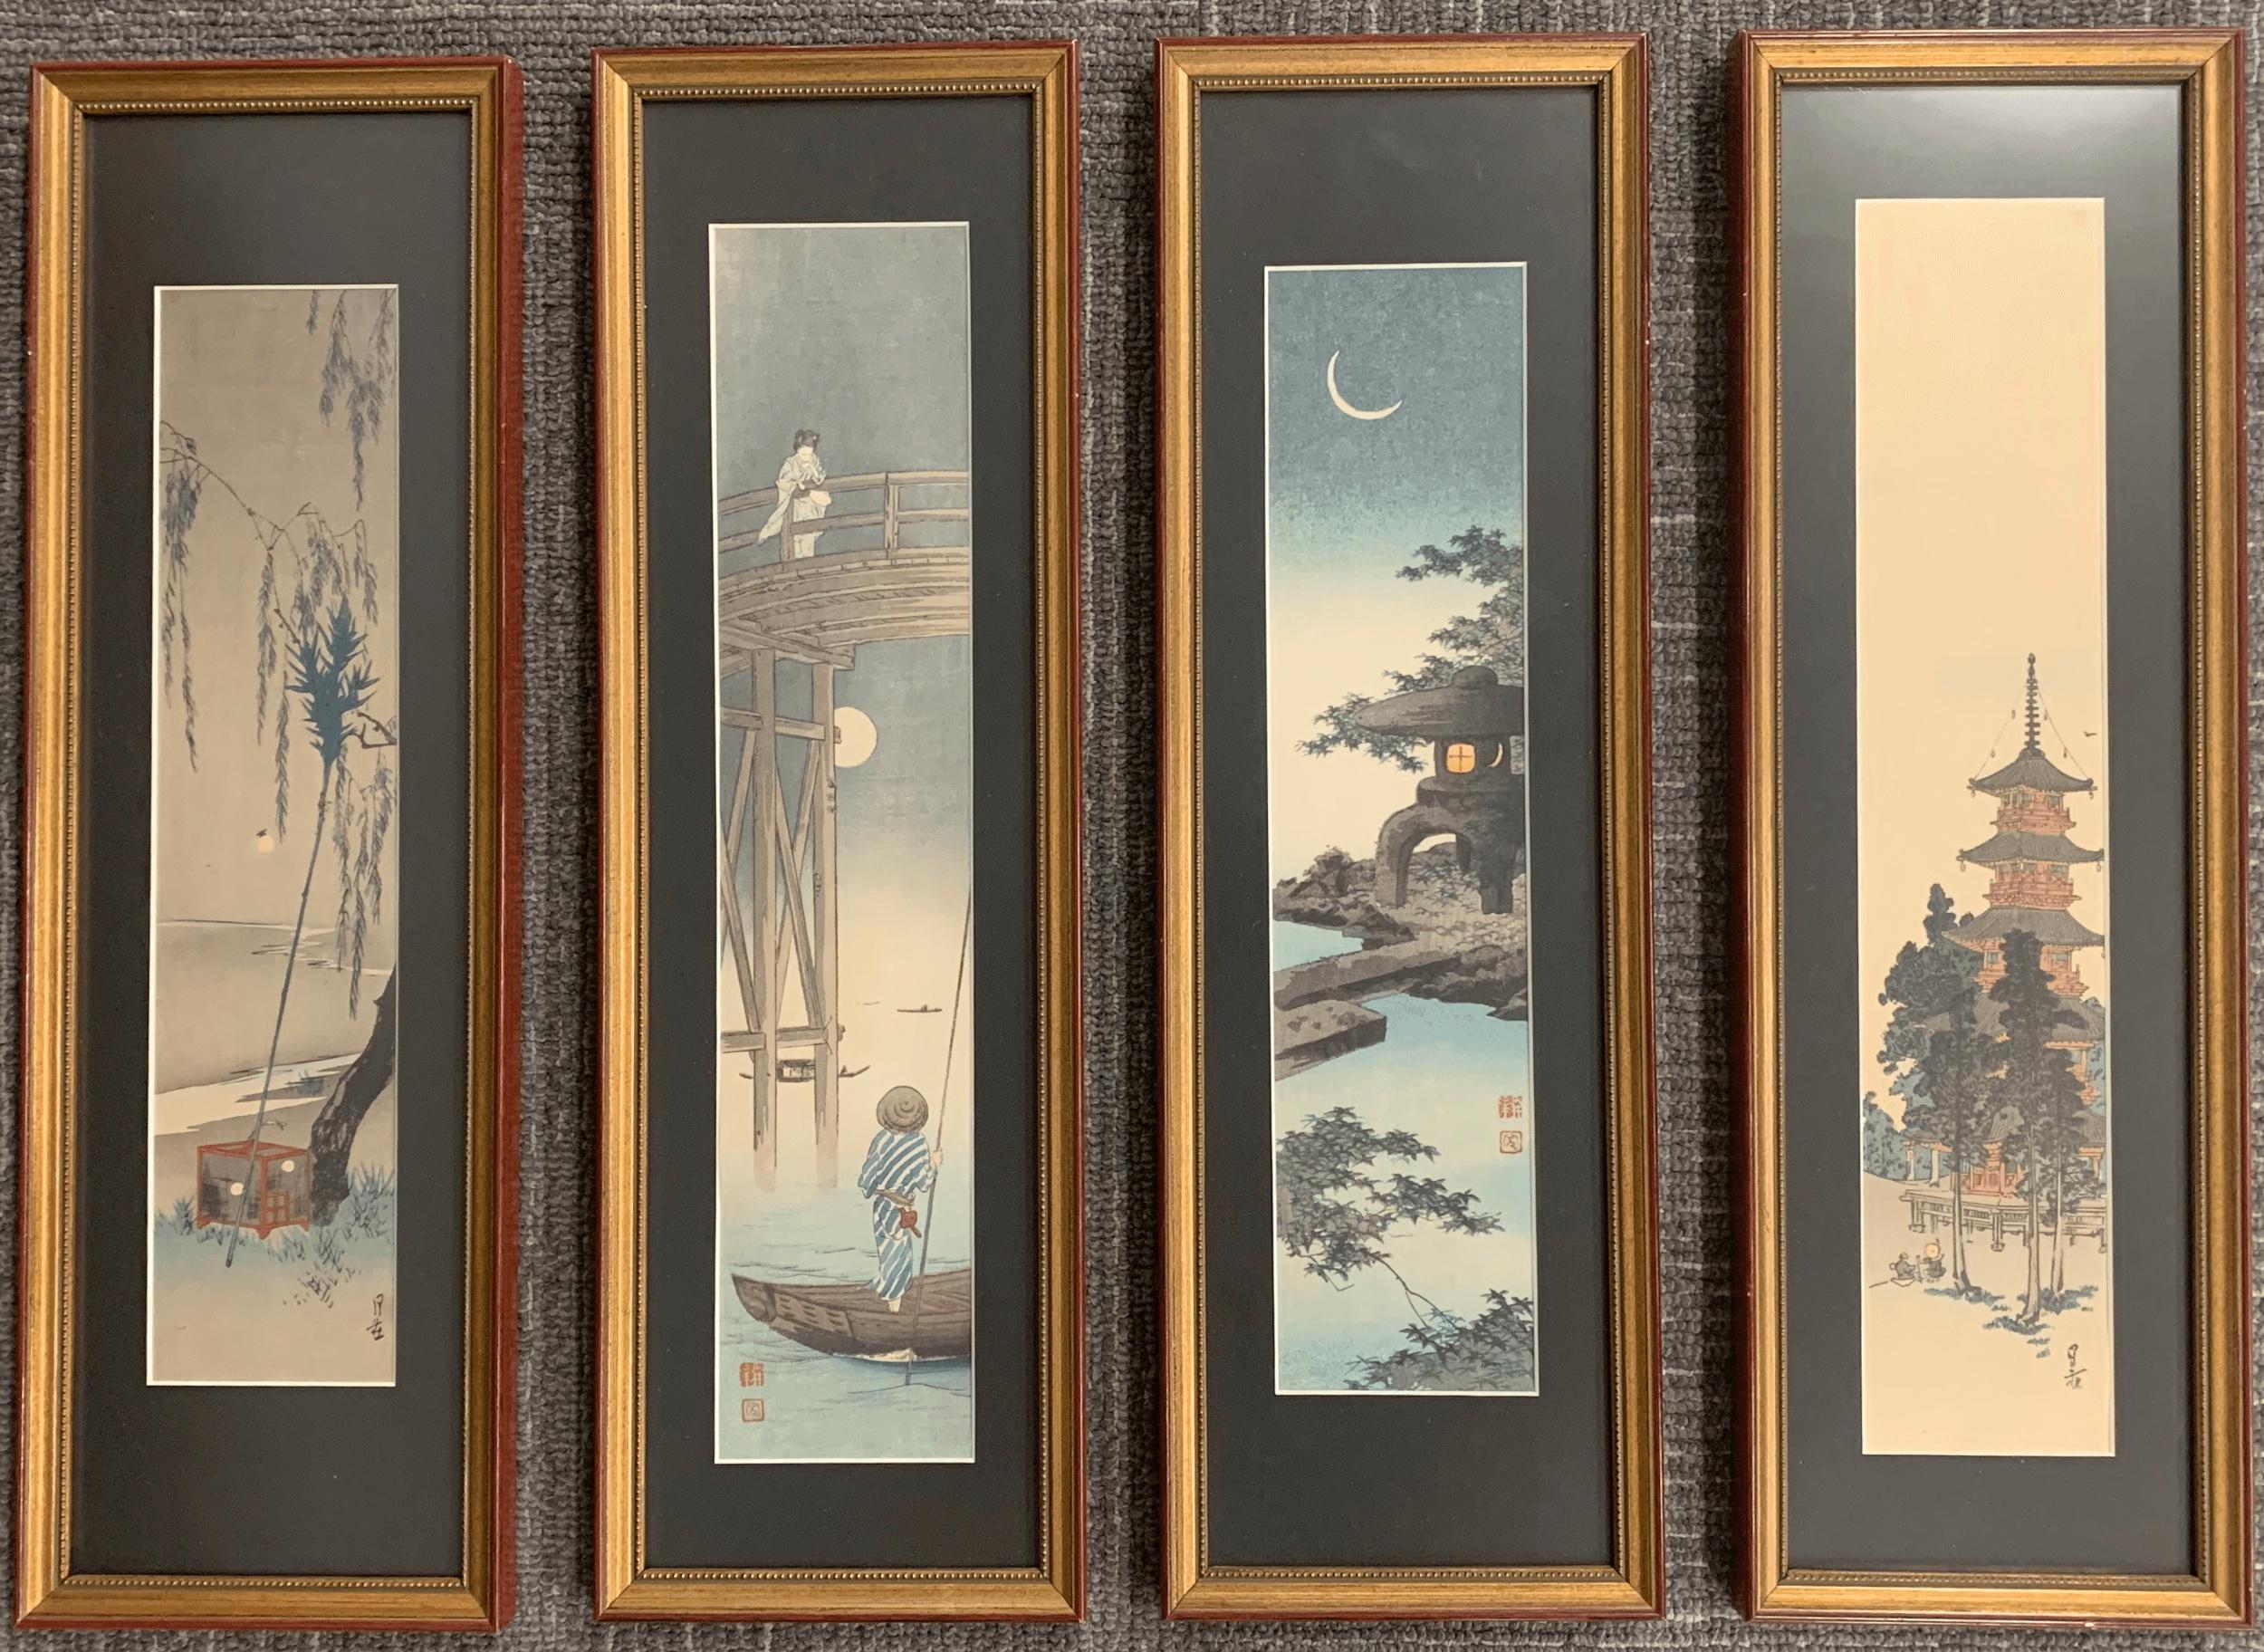 Set of four Japanese wood block prints. Each in a custom gilt wood frame with black matted interiors under glass.